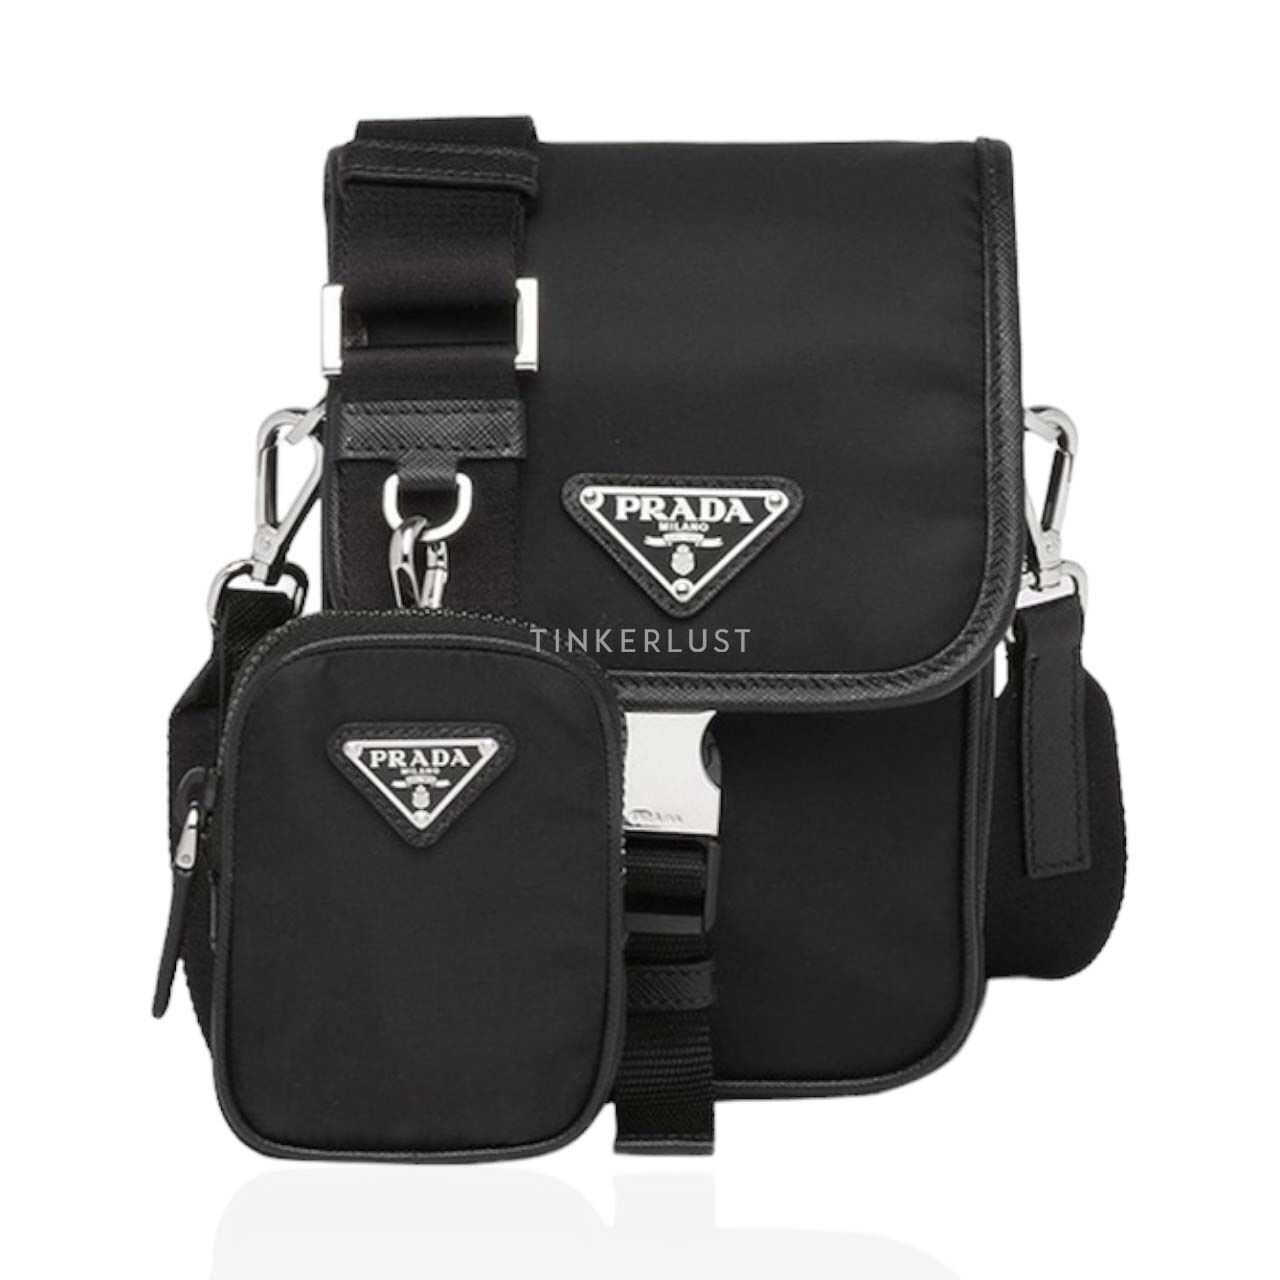 Prada Triangle Logo Flap Square Shoulder Bag in Black Re-Nylon x Saffiano Leather with Pouch